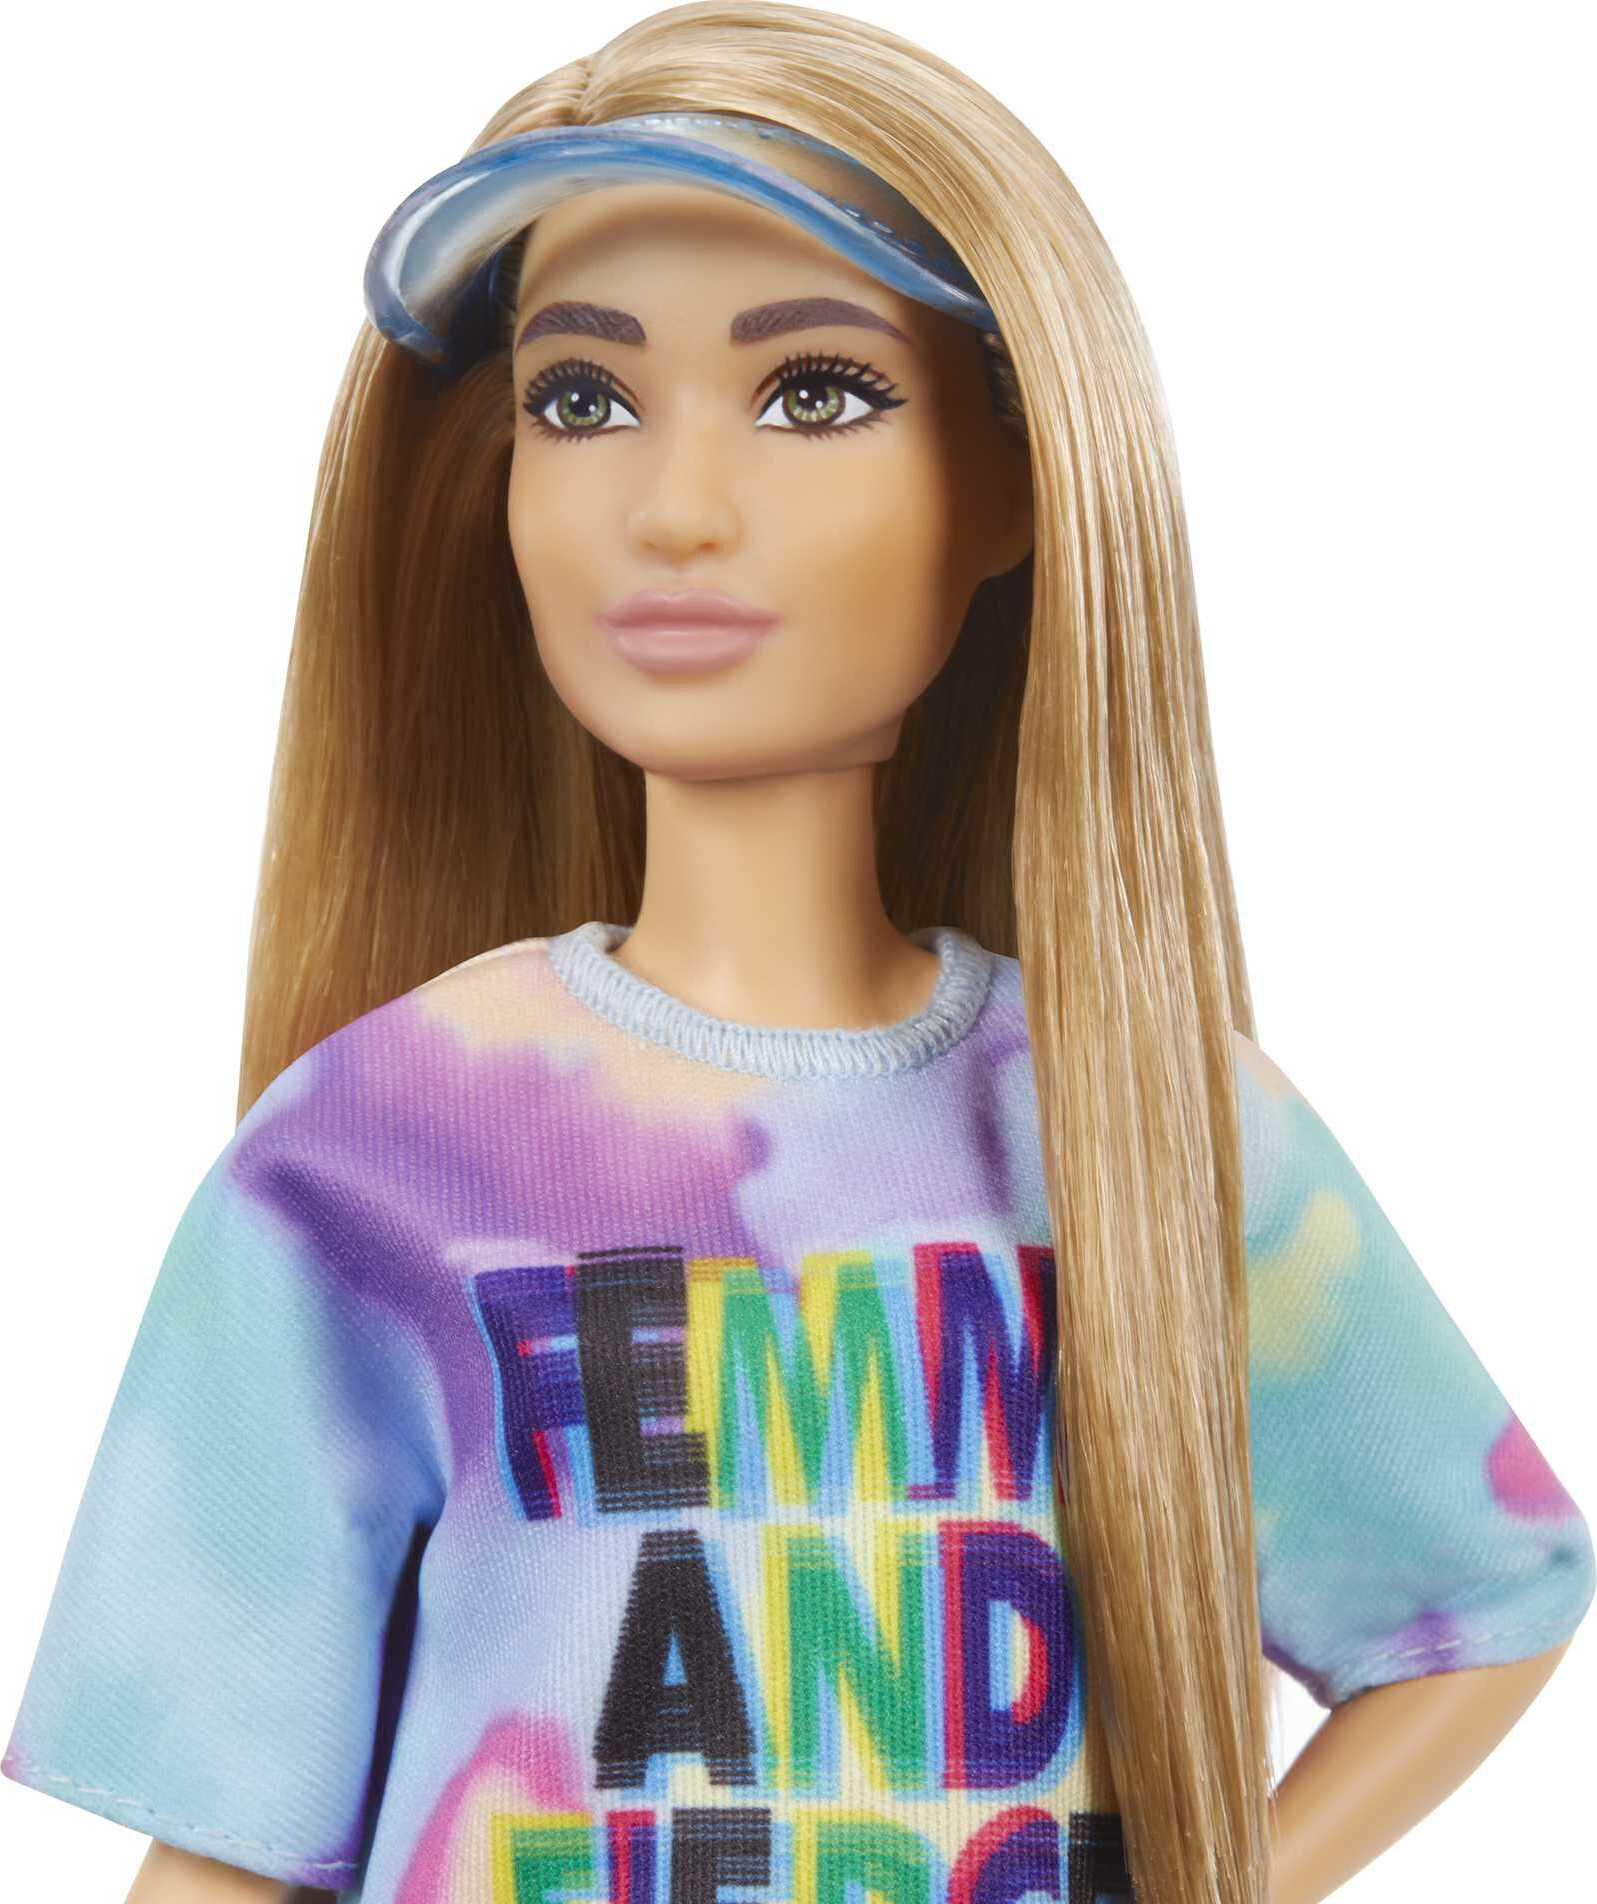 Barbie Fashionistas Doll, Petite, with Light Brown Hair Wearing Tie-Dye T-Shirt Dress, White Shoes & Visor, Toy for Kids 3 to 8 Years Old - image 4 of 7